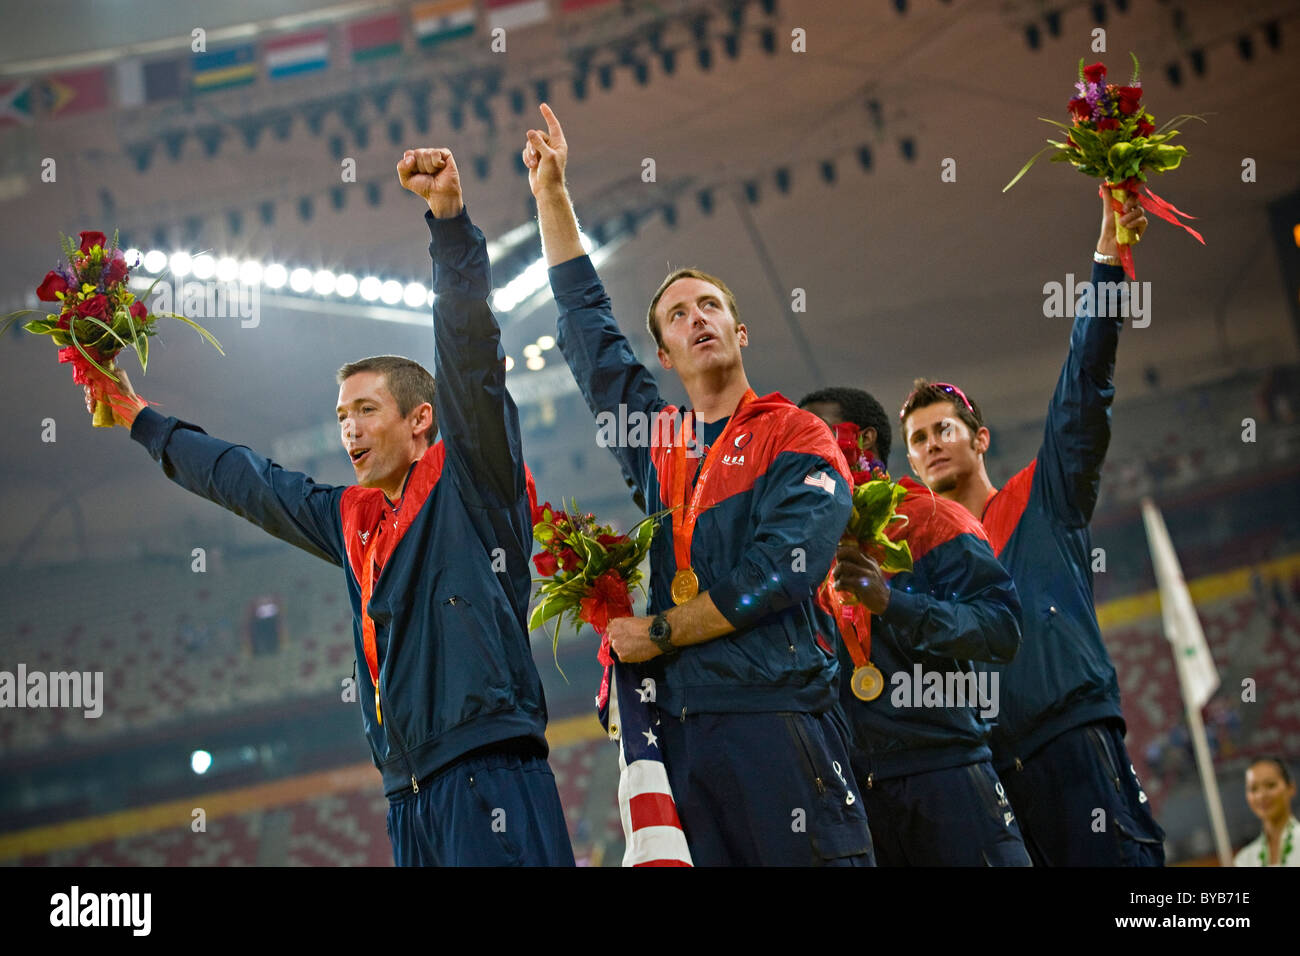 USA team celebrate on the podium with their gold medals after victory in the men's T44 4x100m final relay race Beijing 2008 Stock Photo